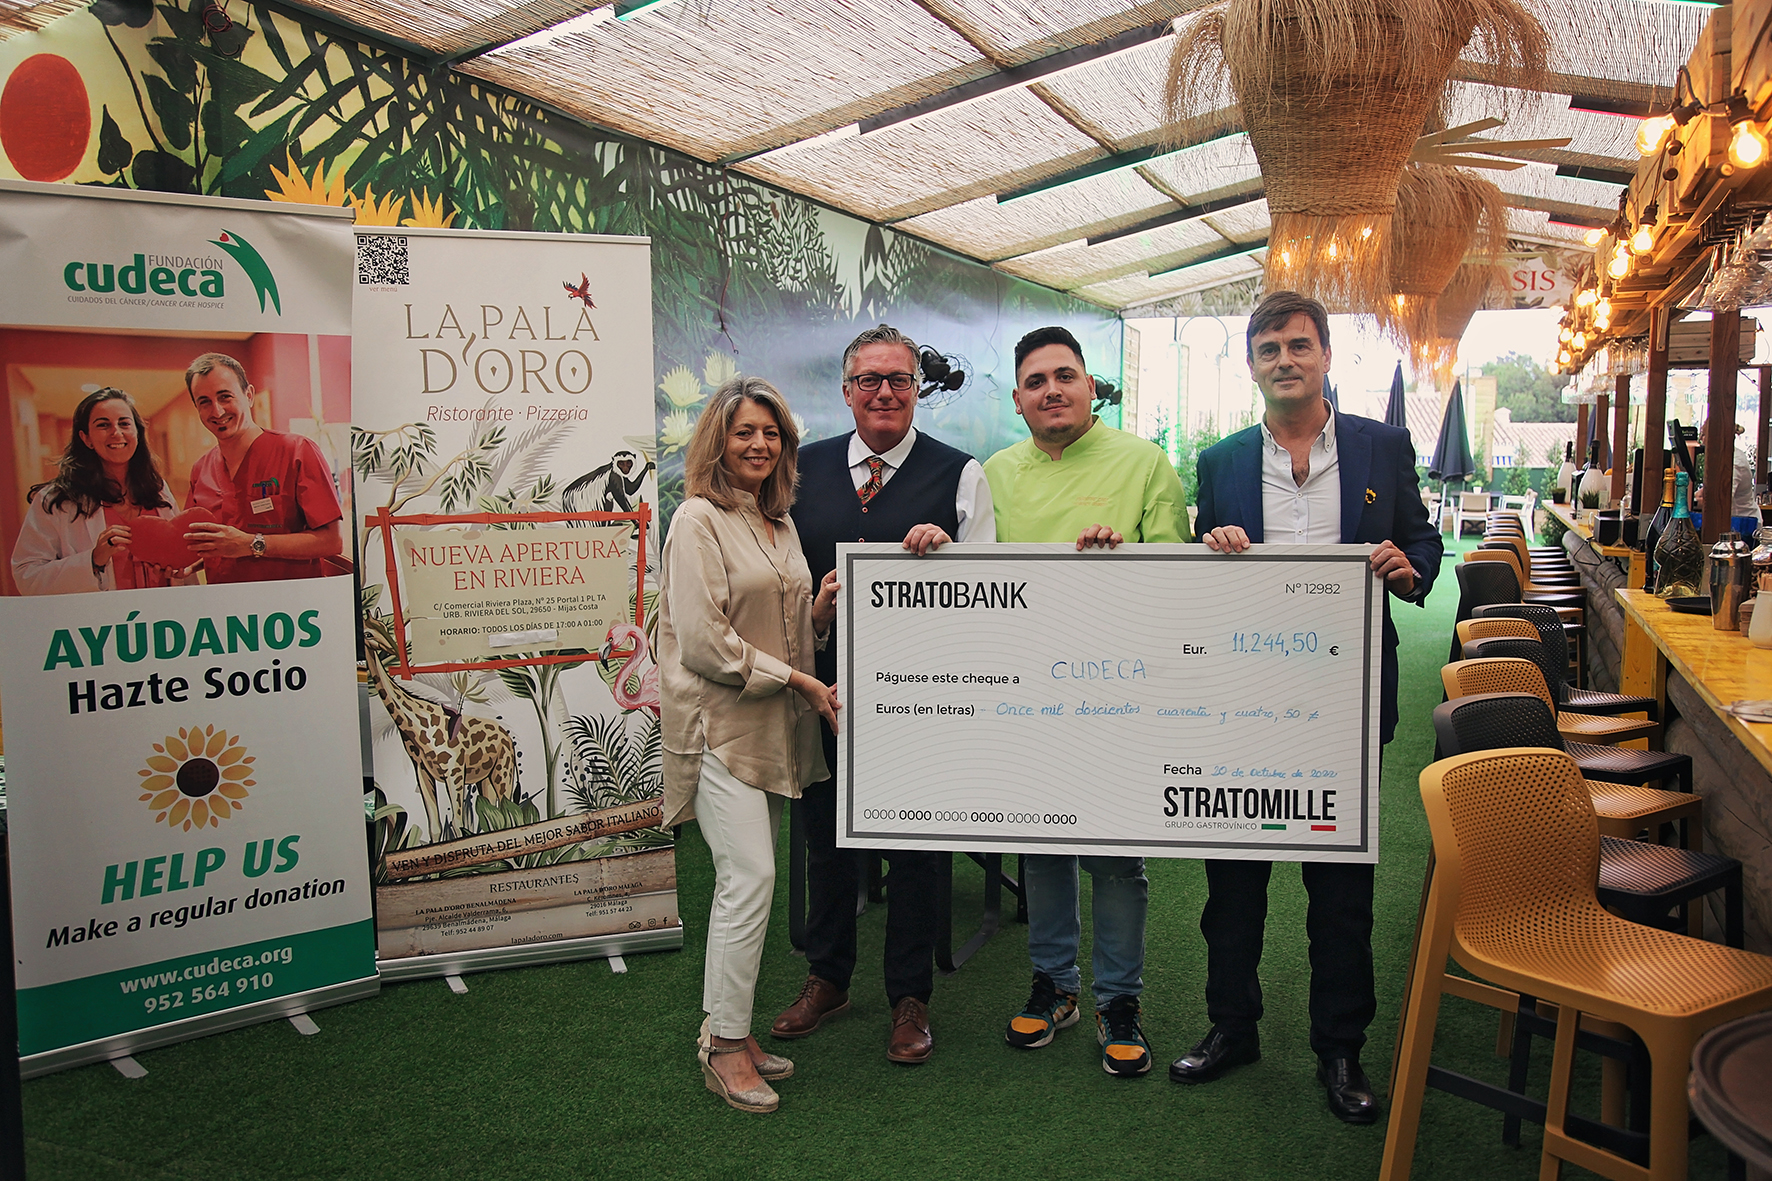 Stratomille Group’s charity commitment to Cudeca raise more than 11,000€